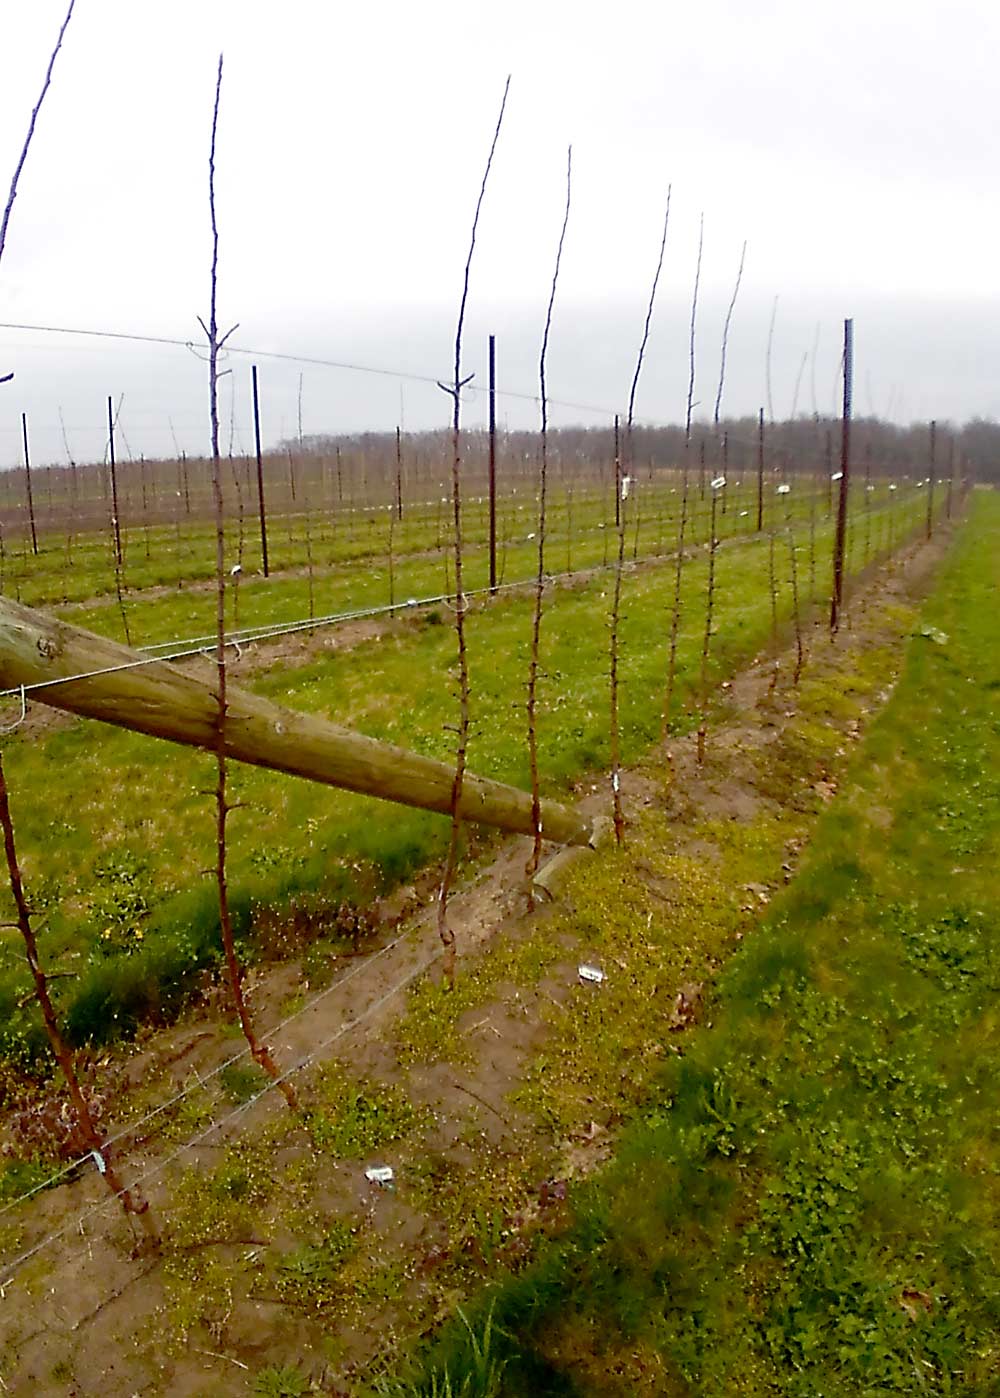 MAIA-L trees on Geneva 41 rootstocks at Burnham Orchards in Berlin Heights, Ohio, in late April. Planted in 2019, these trees are starting their second year in the ground. Growers say MAIA-L, marketed as Ludacrisp, is an annual cropper with wide-angled branches. (Courtesy Joe Burnham)